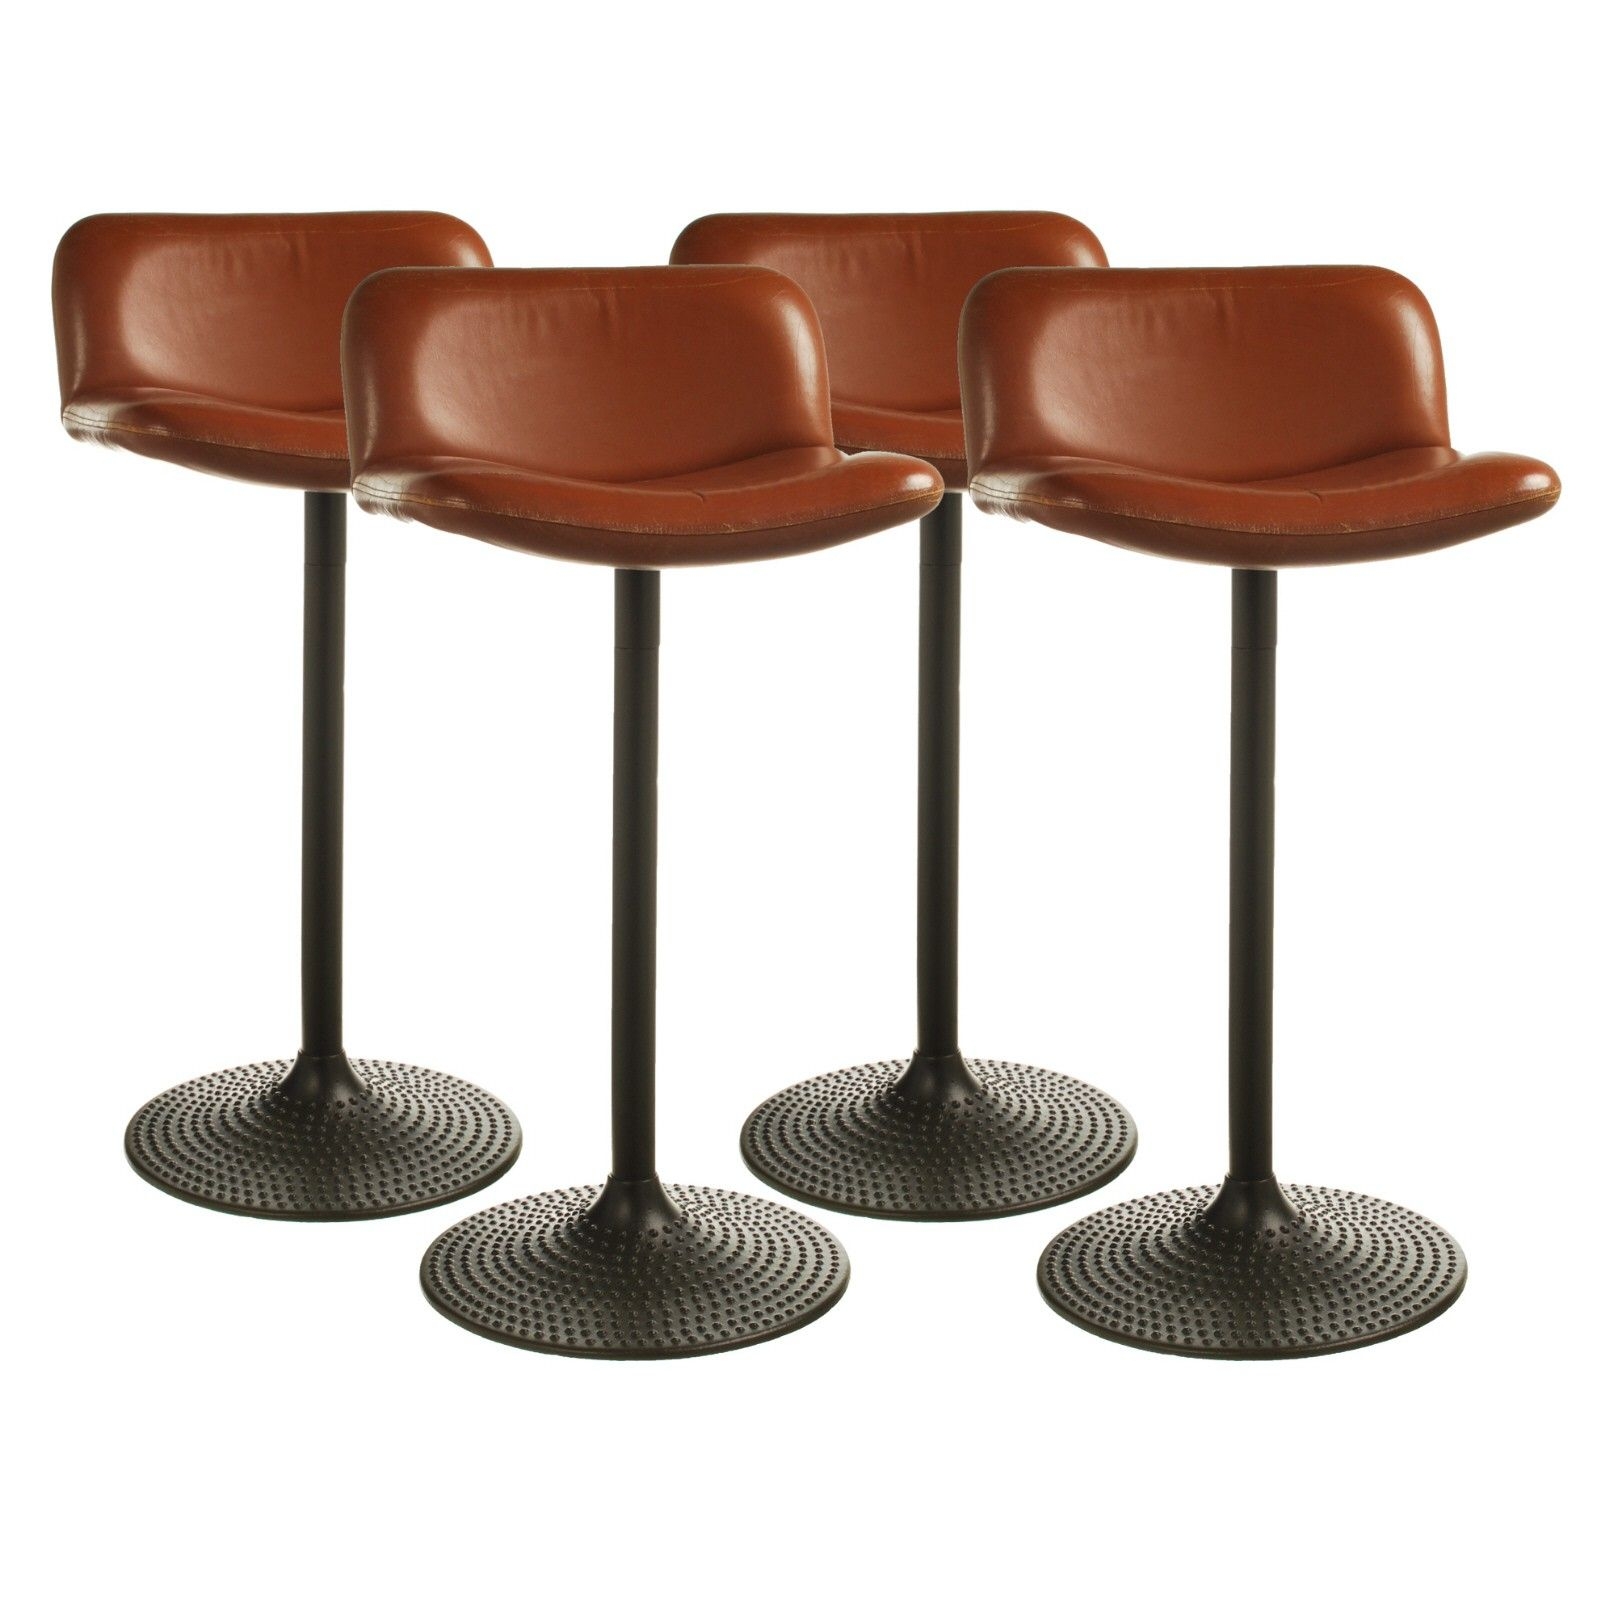 Furniture brown leather bar stool with back and single black